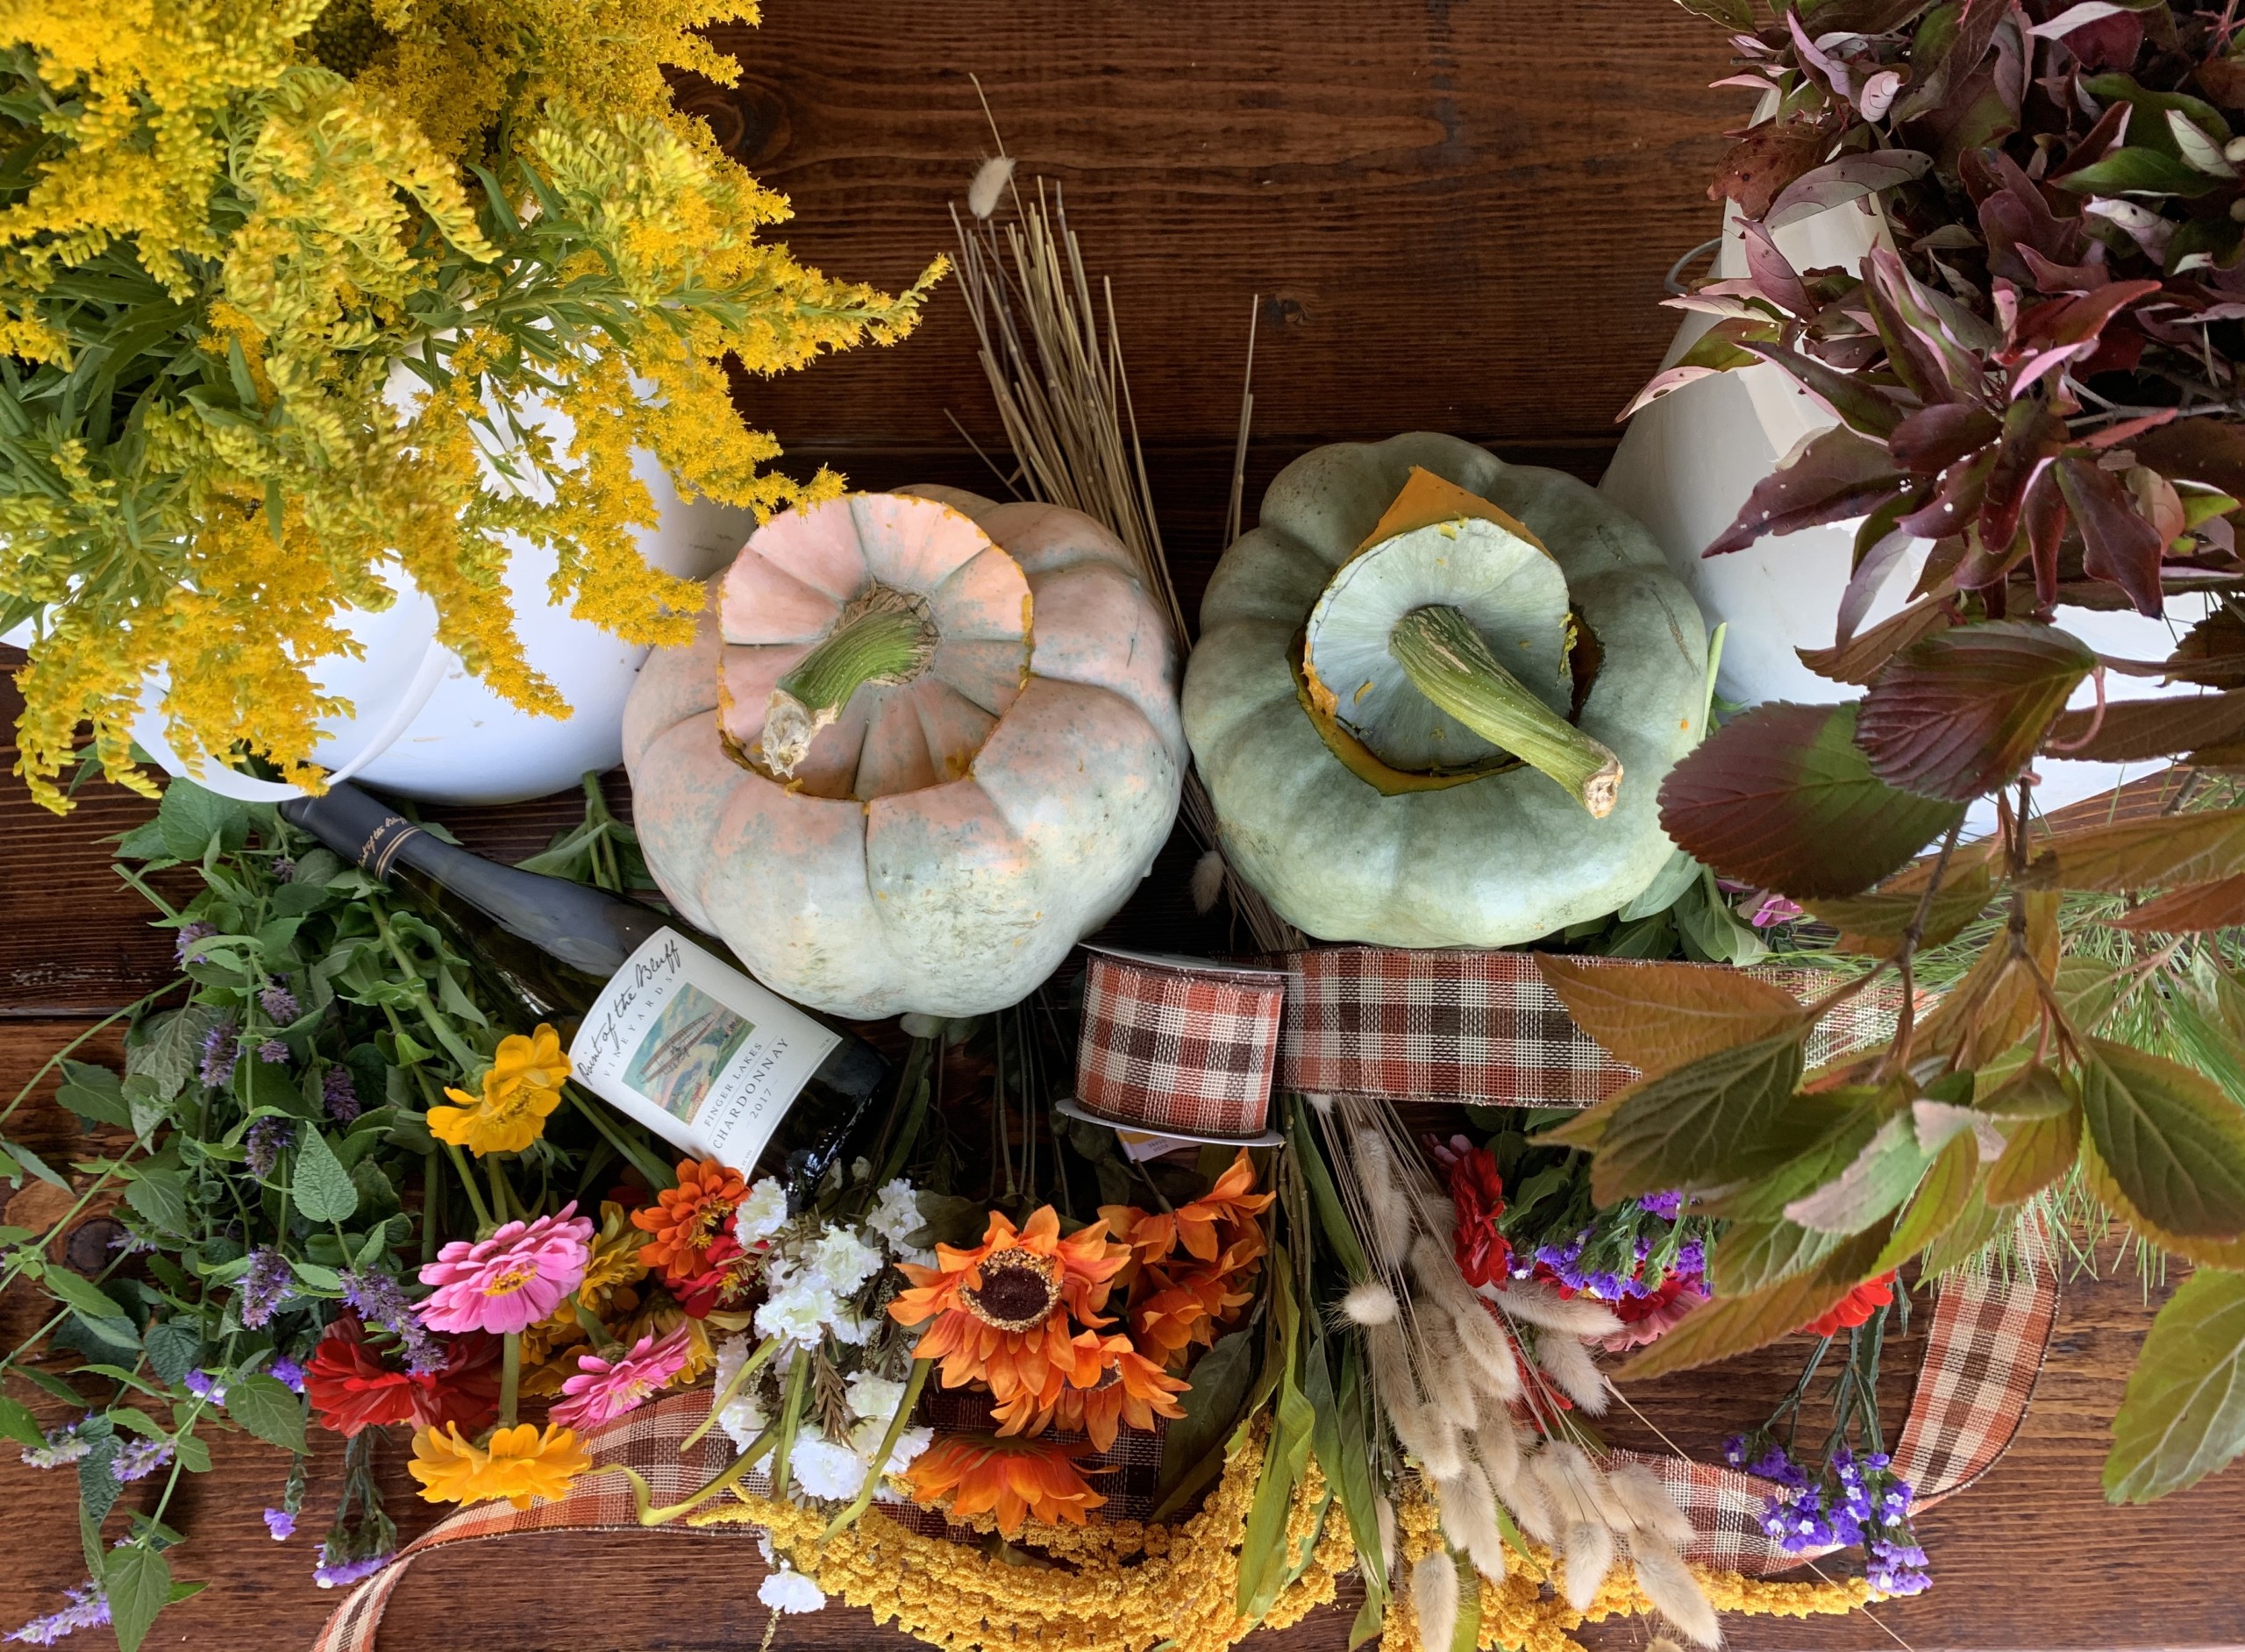 Pumpkins, flowers, and wine displayed for the workshop